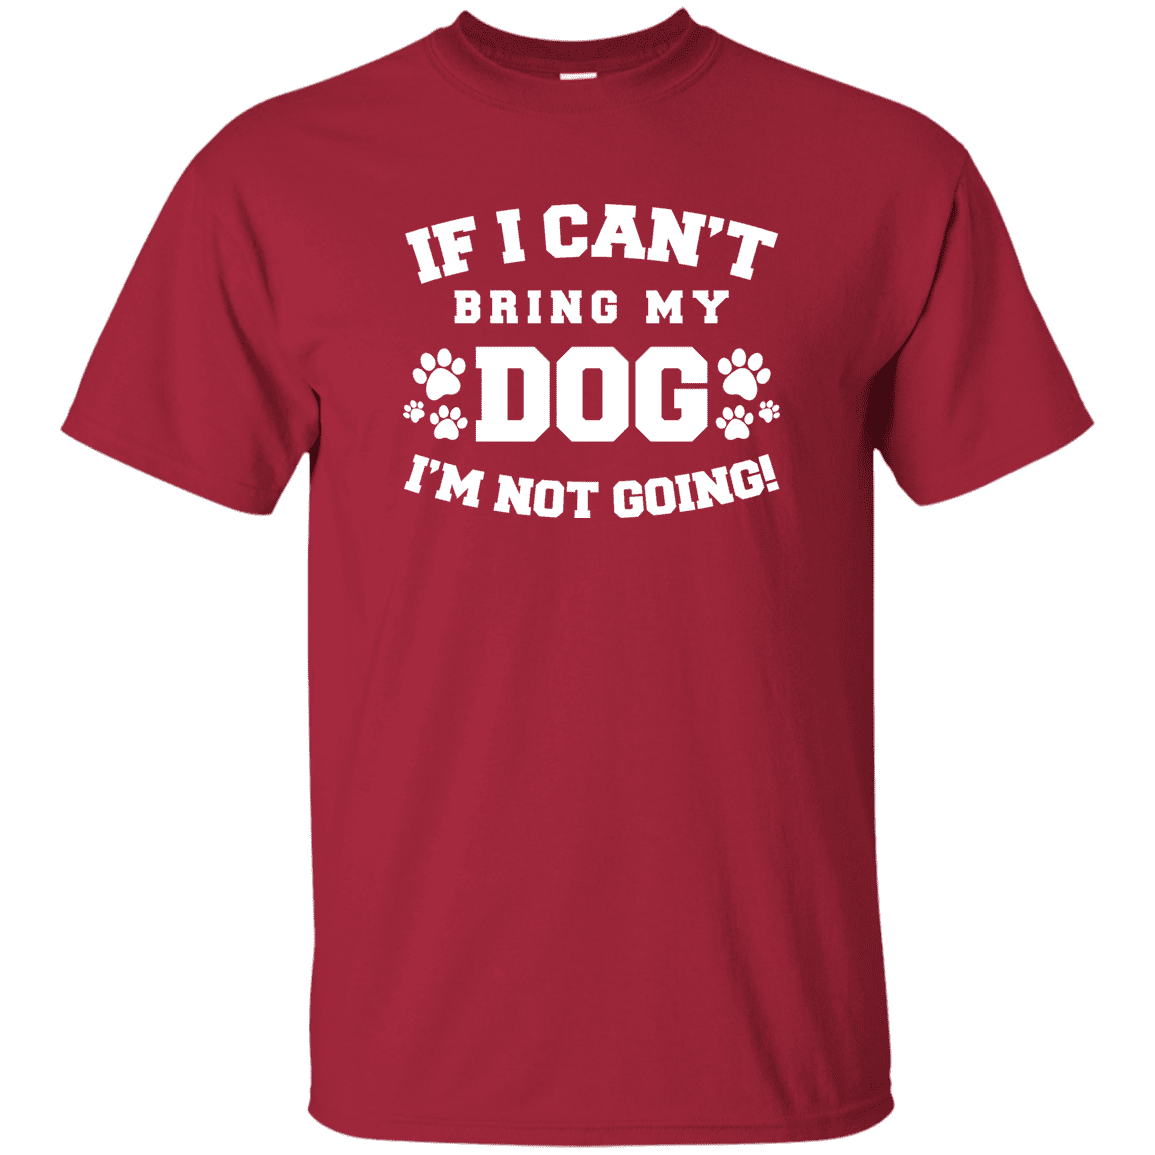 If I Can't Bring My Dog - T Shirt.